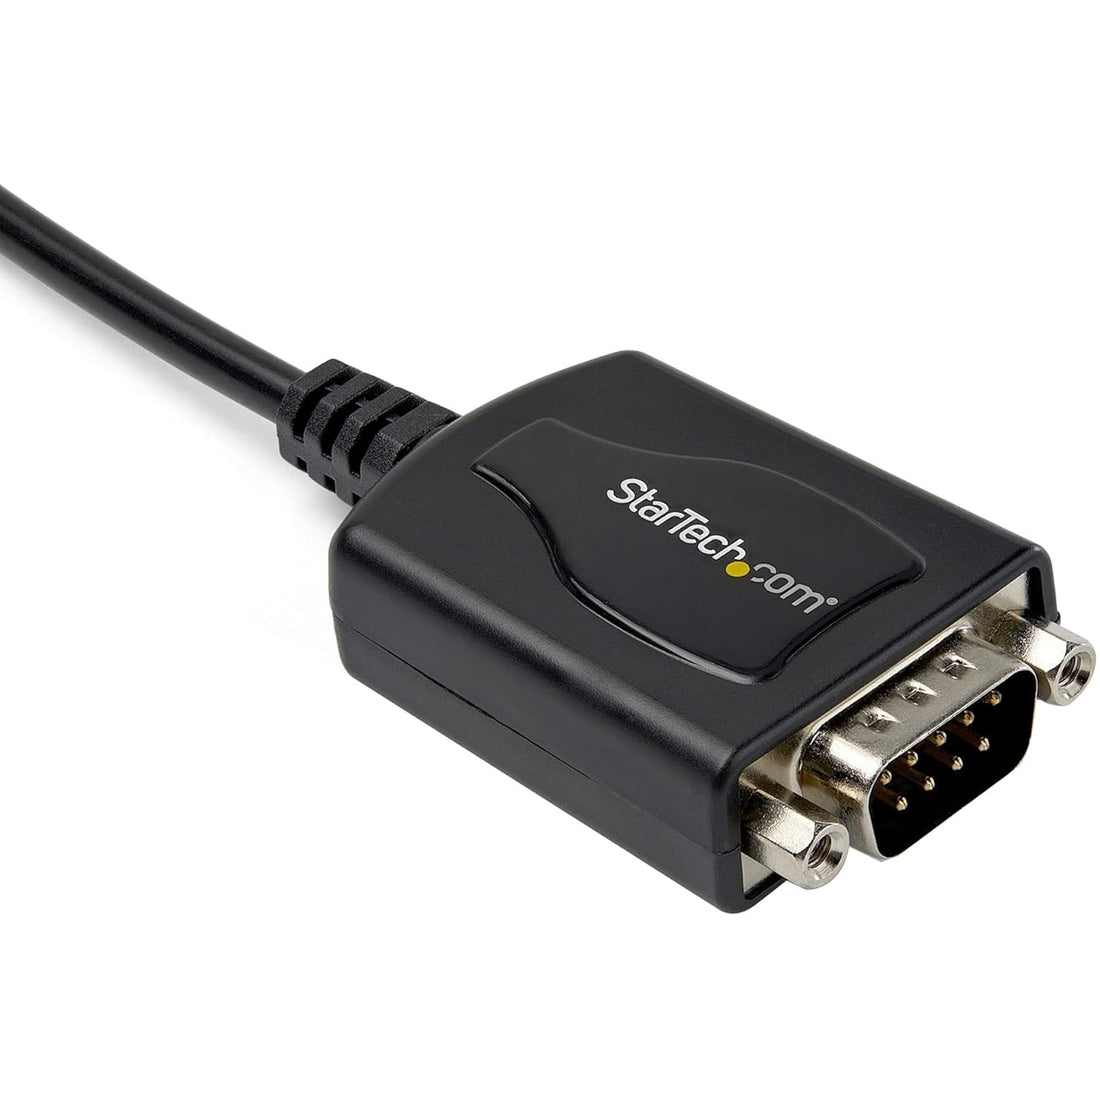 1x USB to Serial Adapter Cable